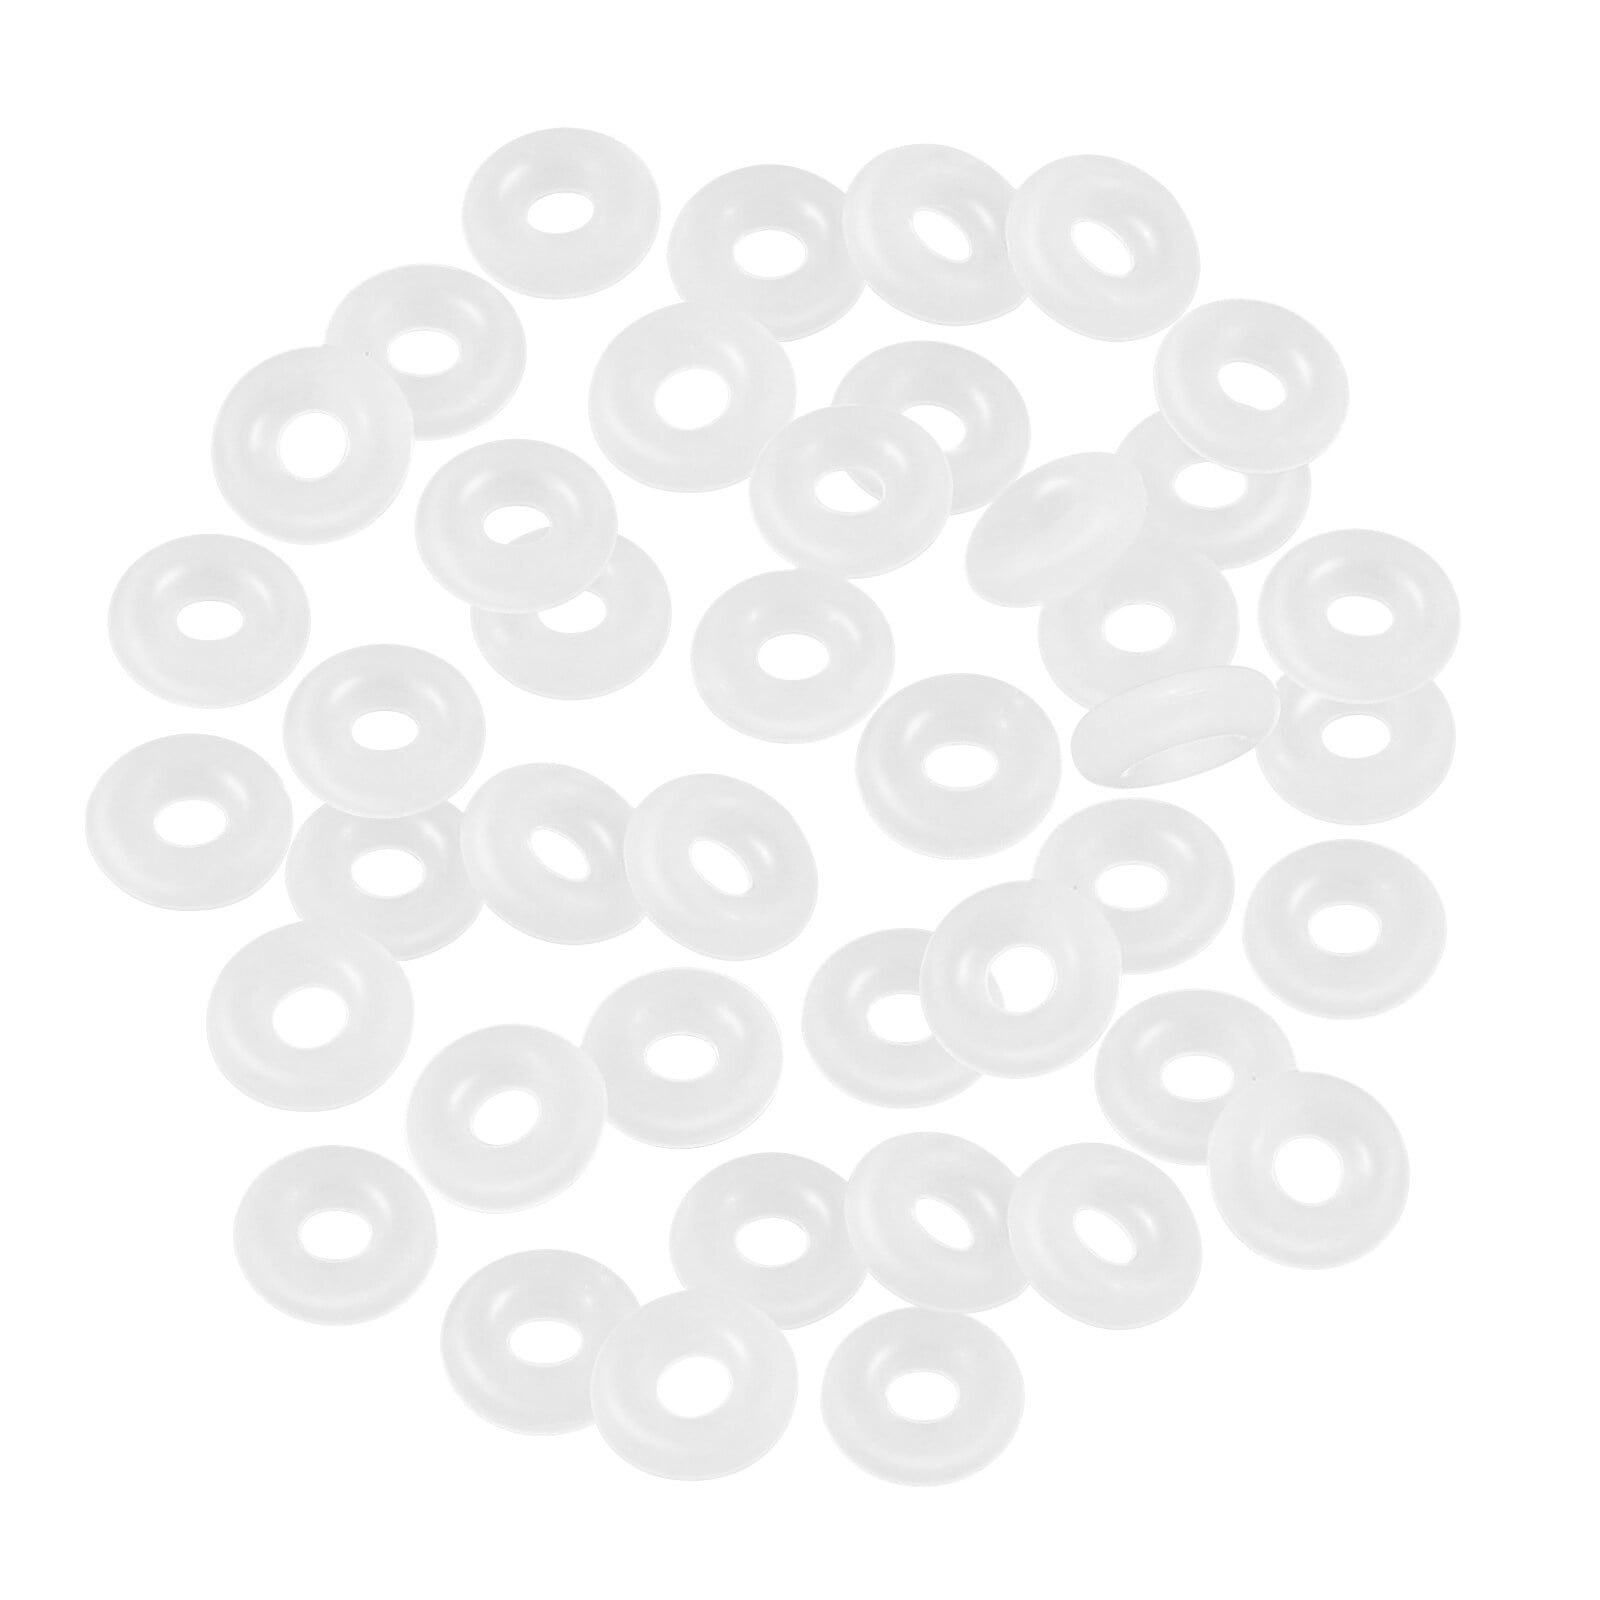 SEWACC 80pcs Charm Bracelet Spacers Silicone Beads Bracelet Spacer Beads  Gasket Rubber Rings Adjuster Beads Spacer o Rings Bead Spacer Stopper Beads